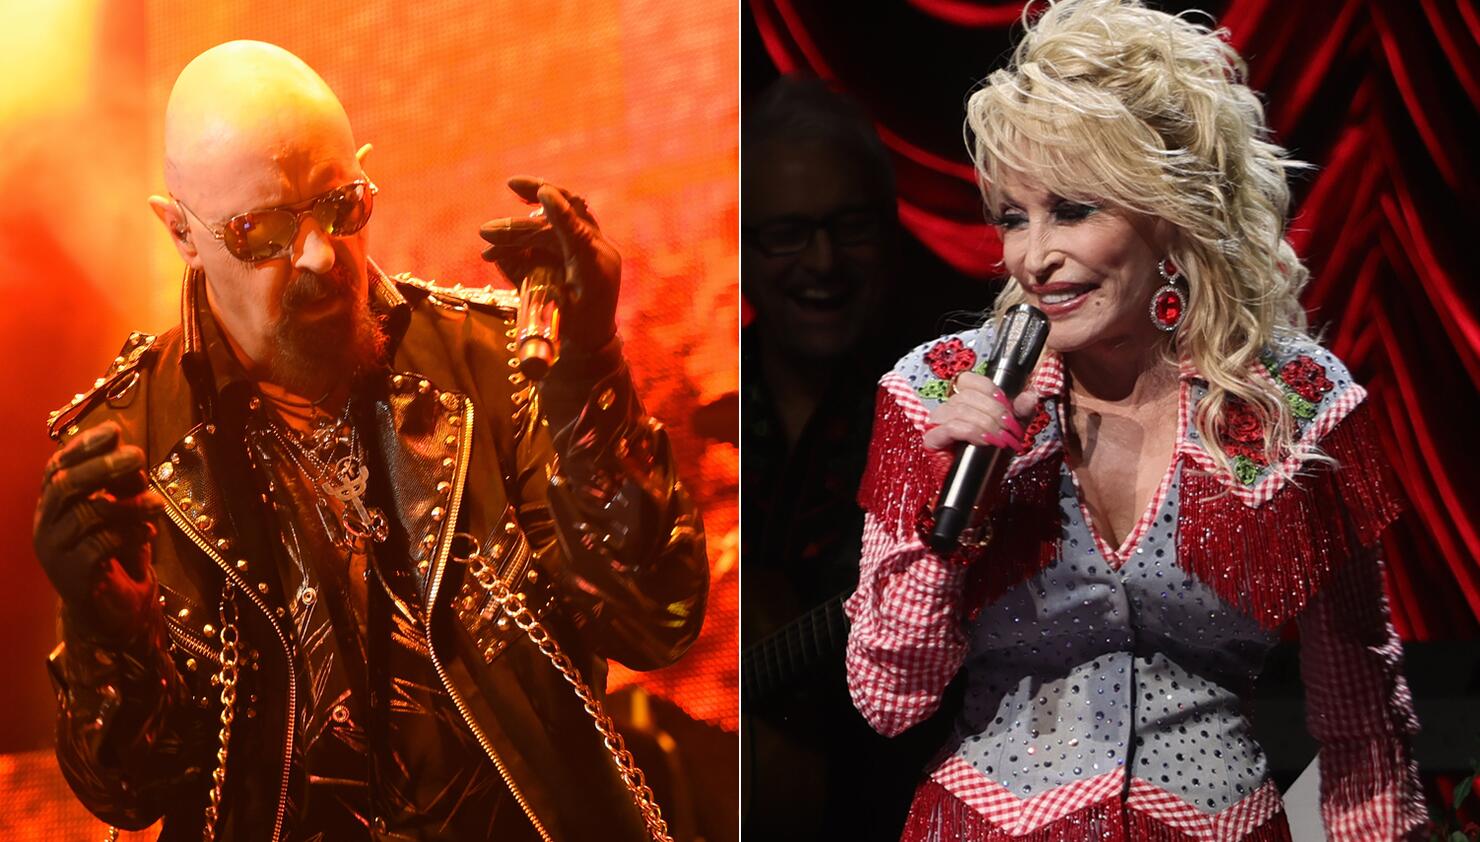 Judas Priest's Rob Halford Talks Rock and Roll Hall of Fame